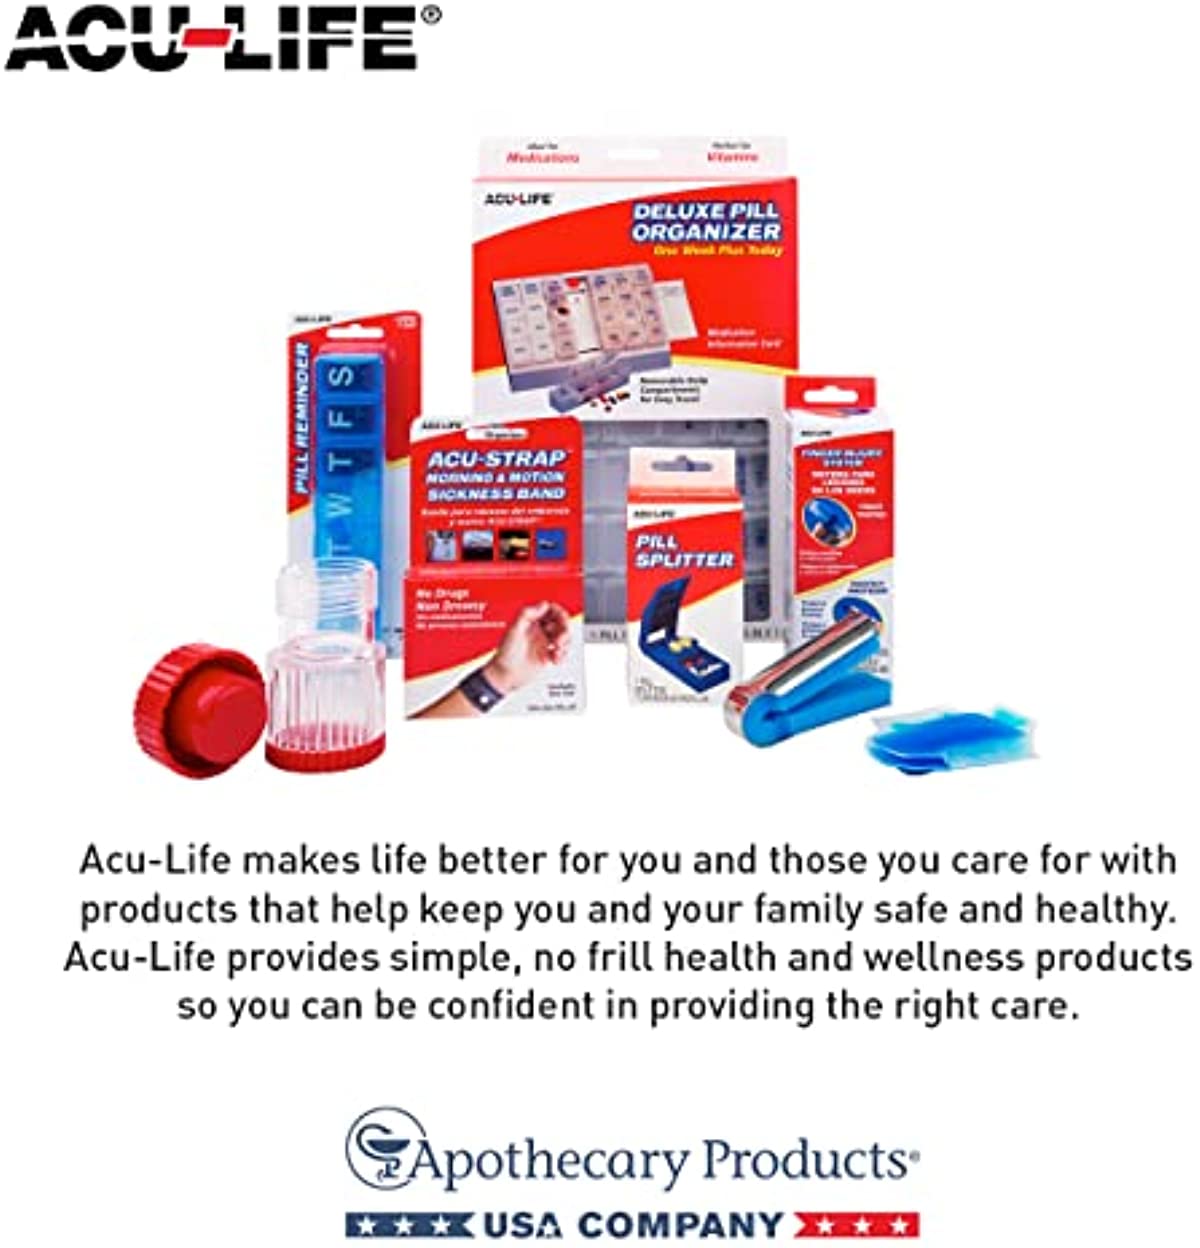 Acu-Life Pill Cutter and Splitter, Retractable Blade, Cuts Pills, Vitamins, Tablets, Travel Size